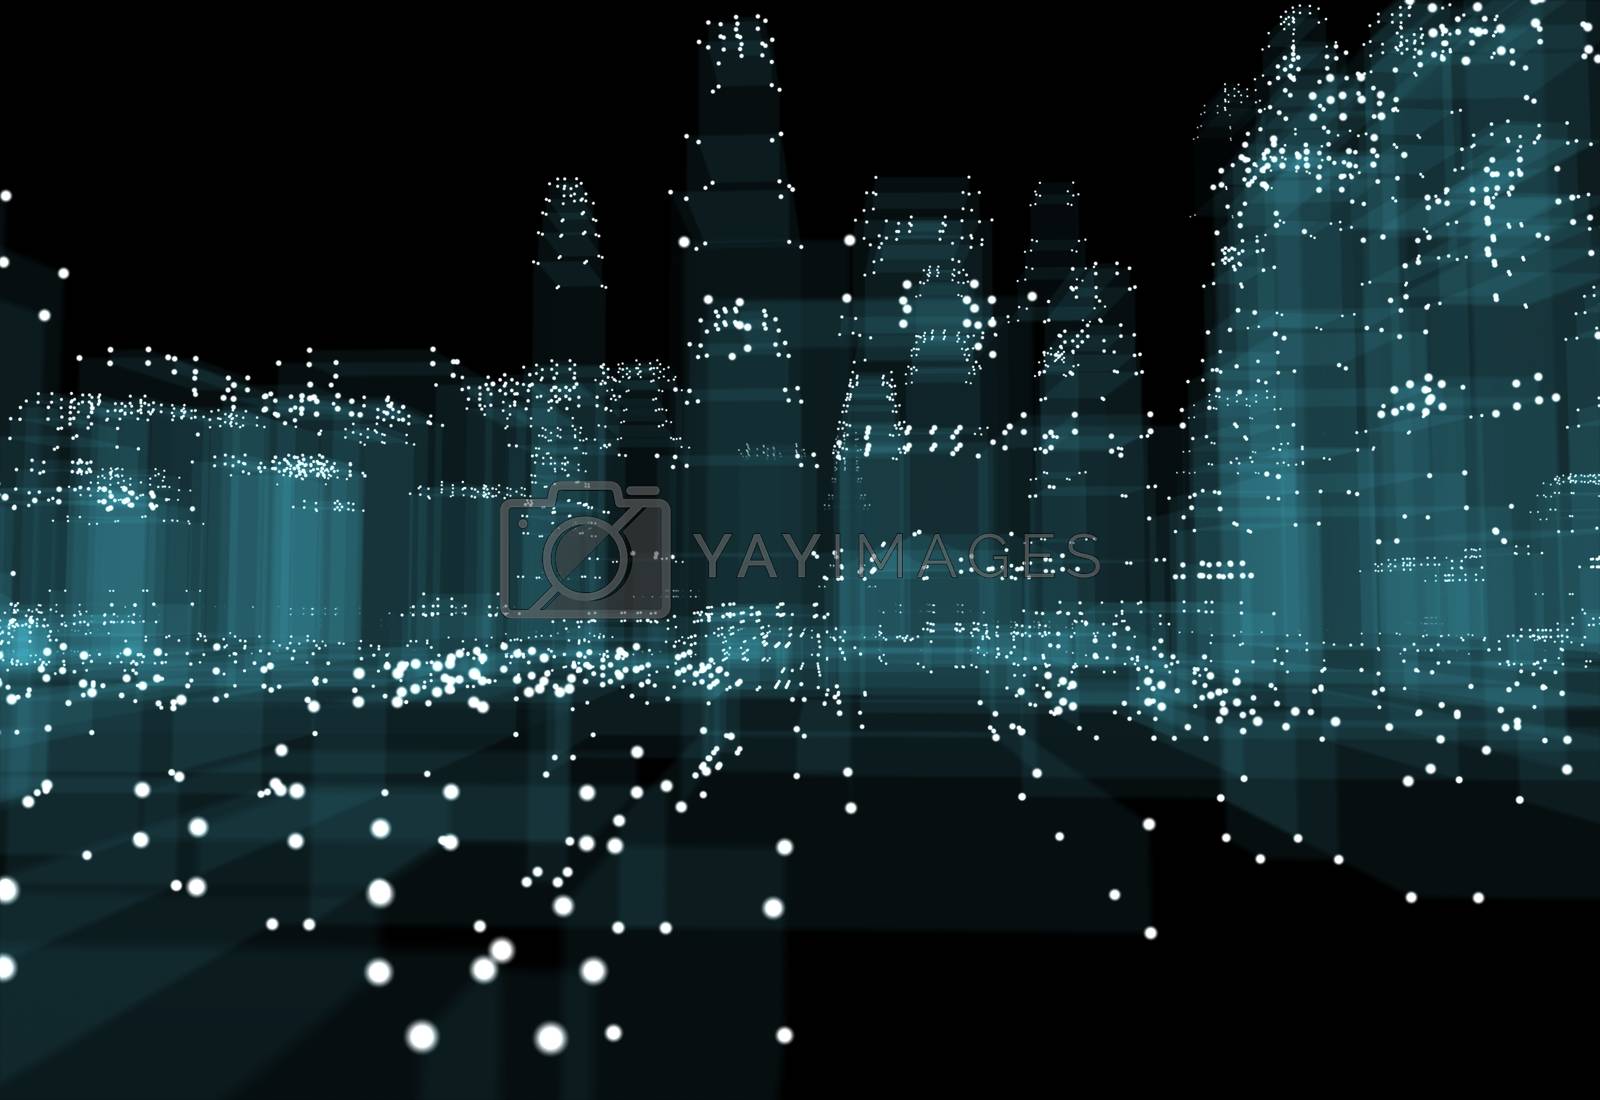 Royalty free image of Abstract 3d city with dots and blue buildings by cherezoff